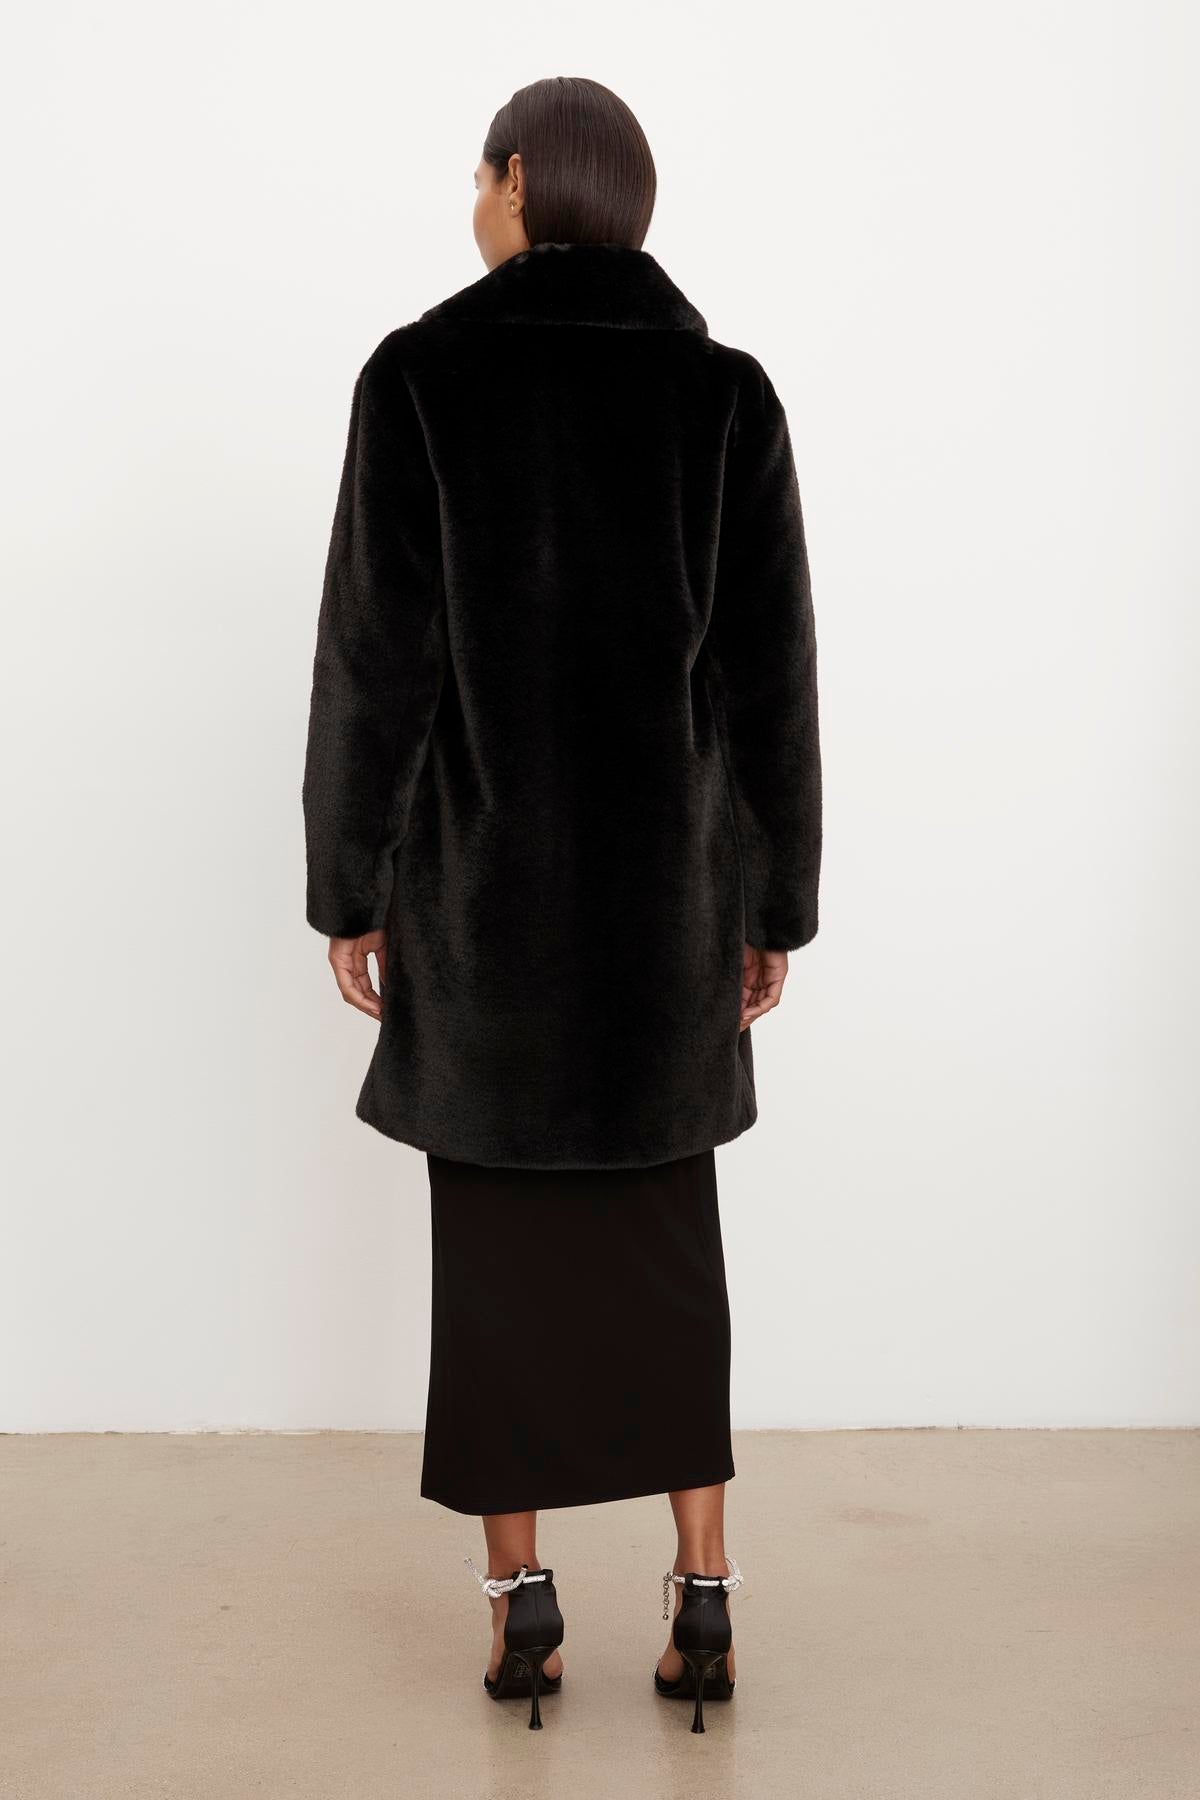 The silhouette of a woman wearing an EVALYN LUX FAUX FUR COAT by Velvet by Graham & Spencer.-35624035320001